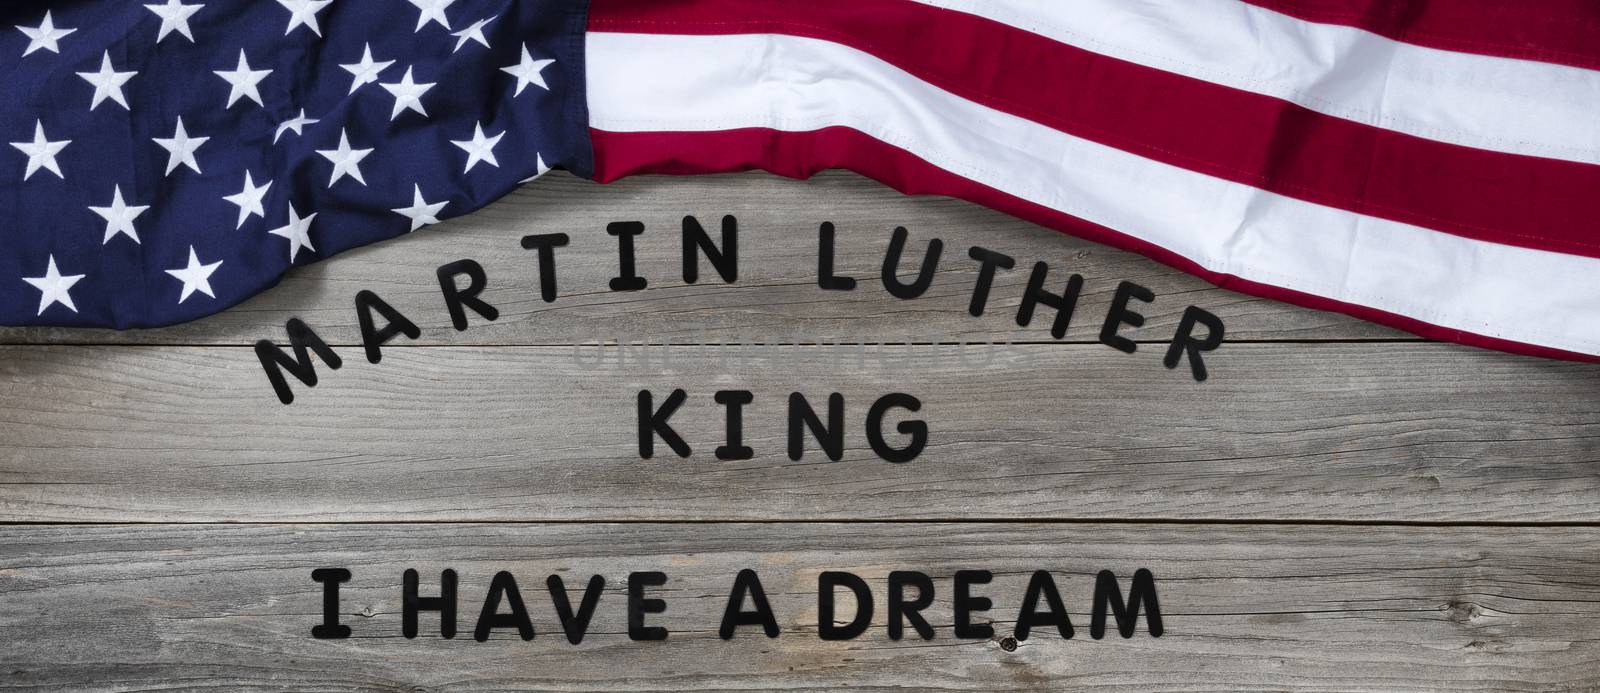 Martin Luther King Day background with text for equality  by tab1962